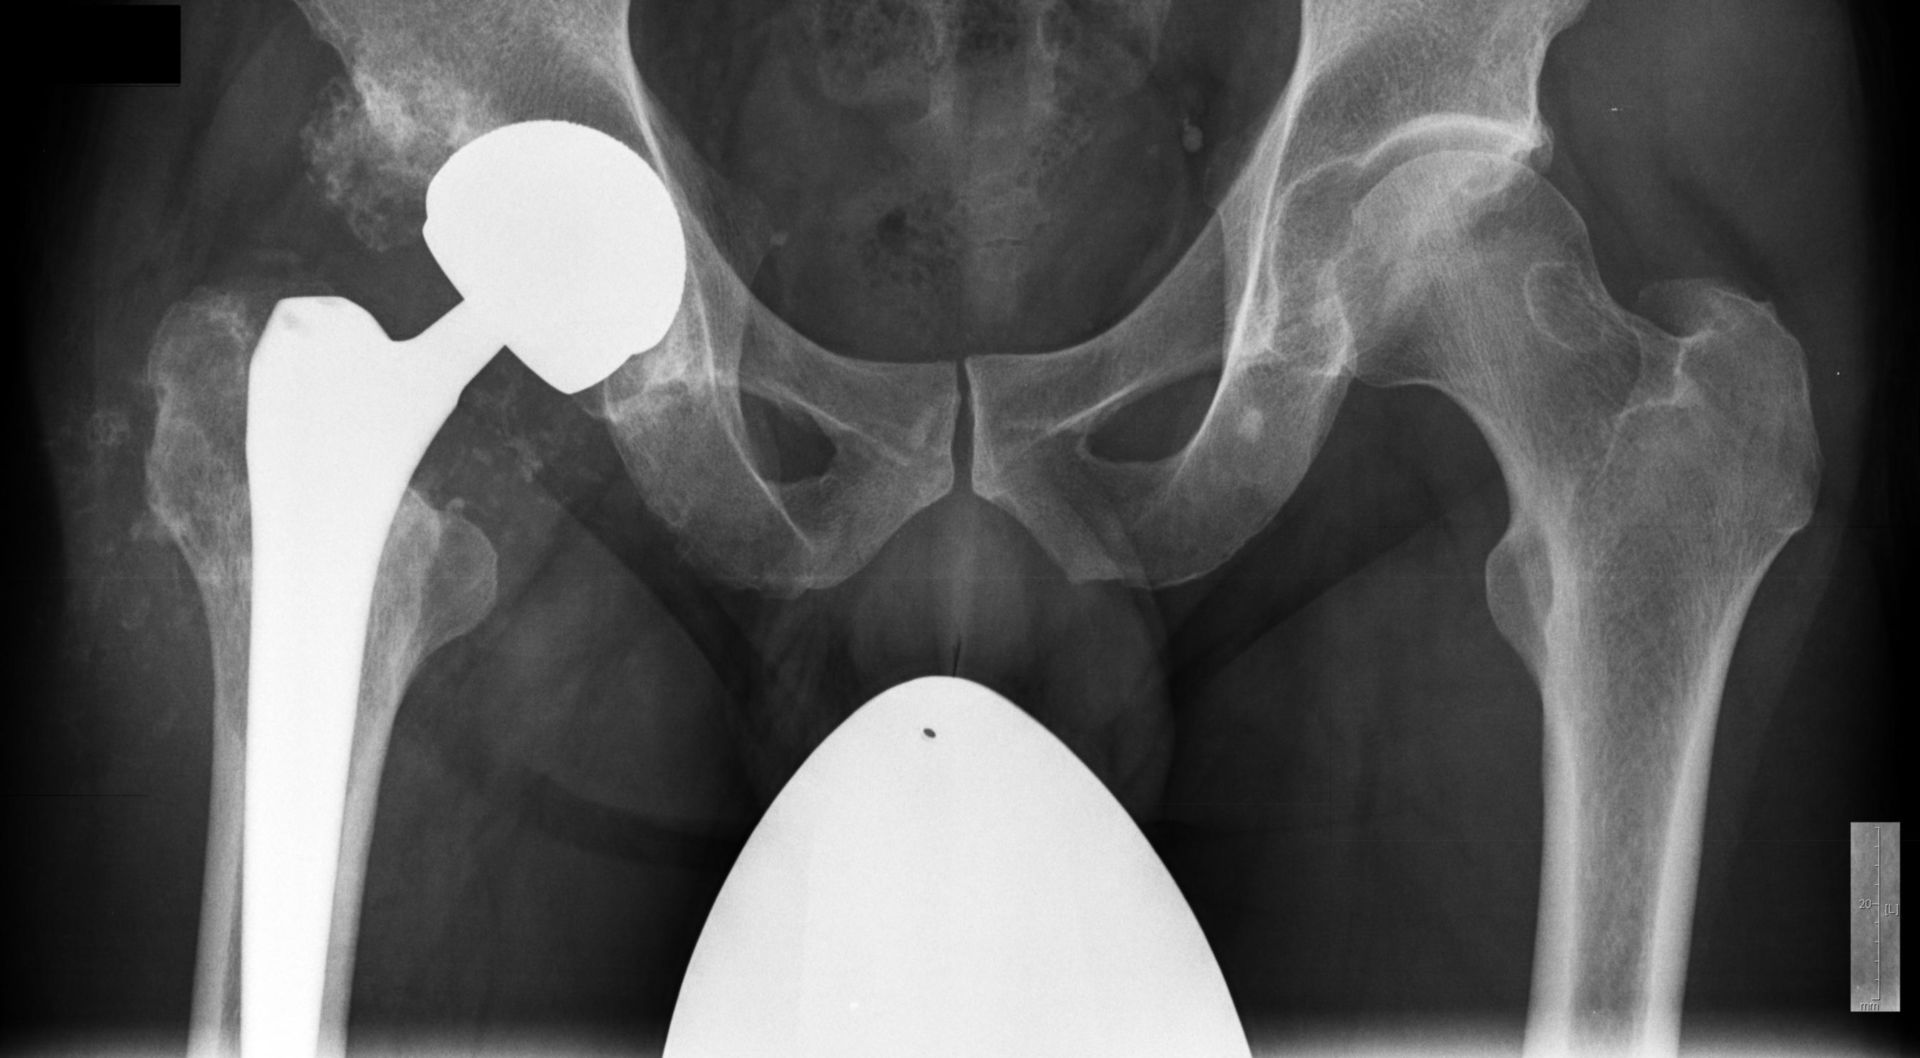 Chondrosarcoma in condition after right hip replacement, 2 plain x-ray Aug 2010